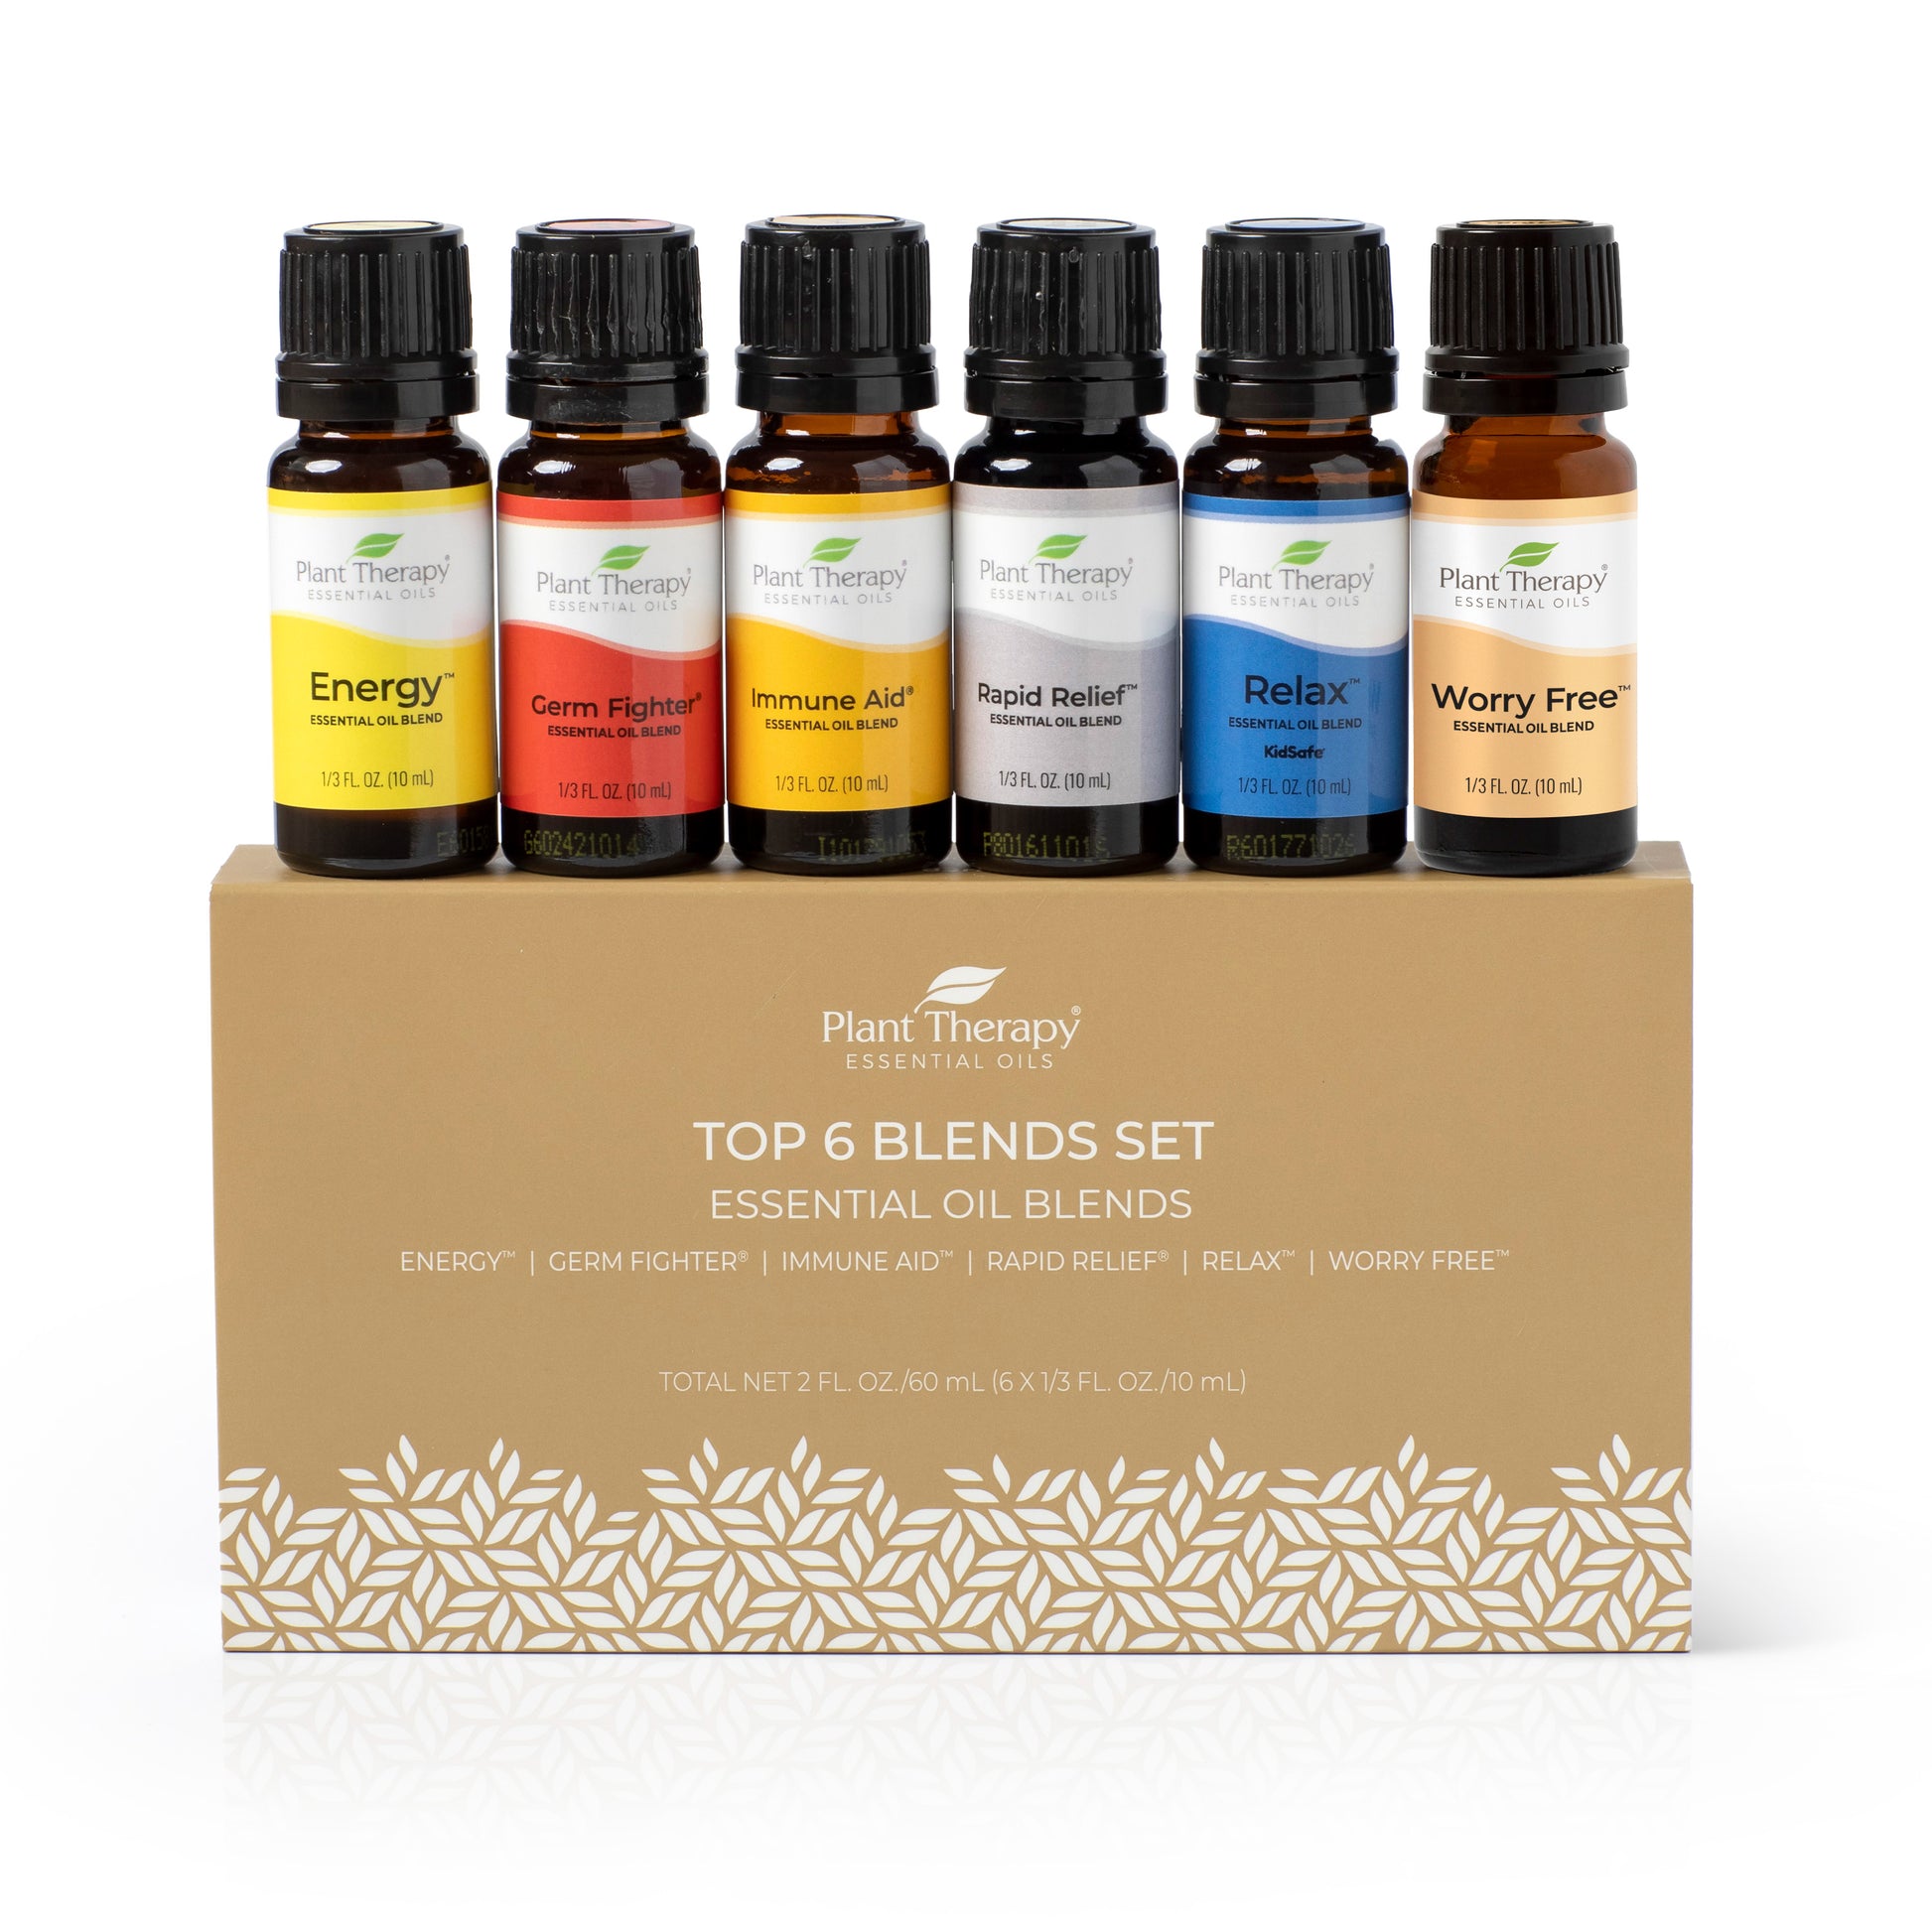 How to Use the Top Oil Blends